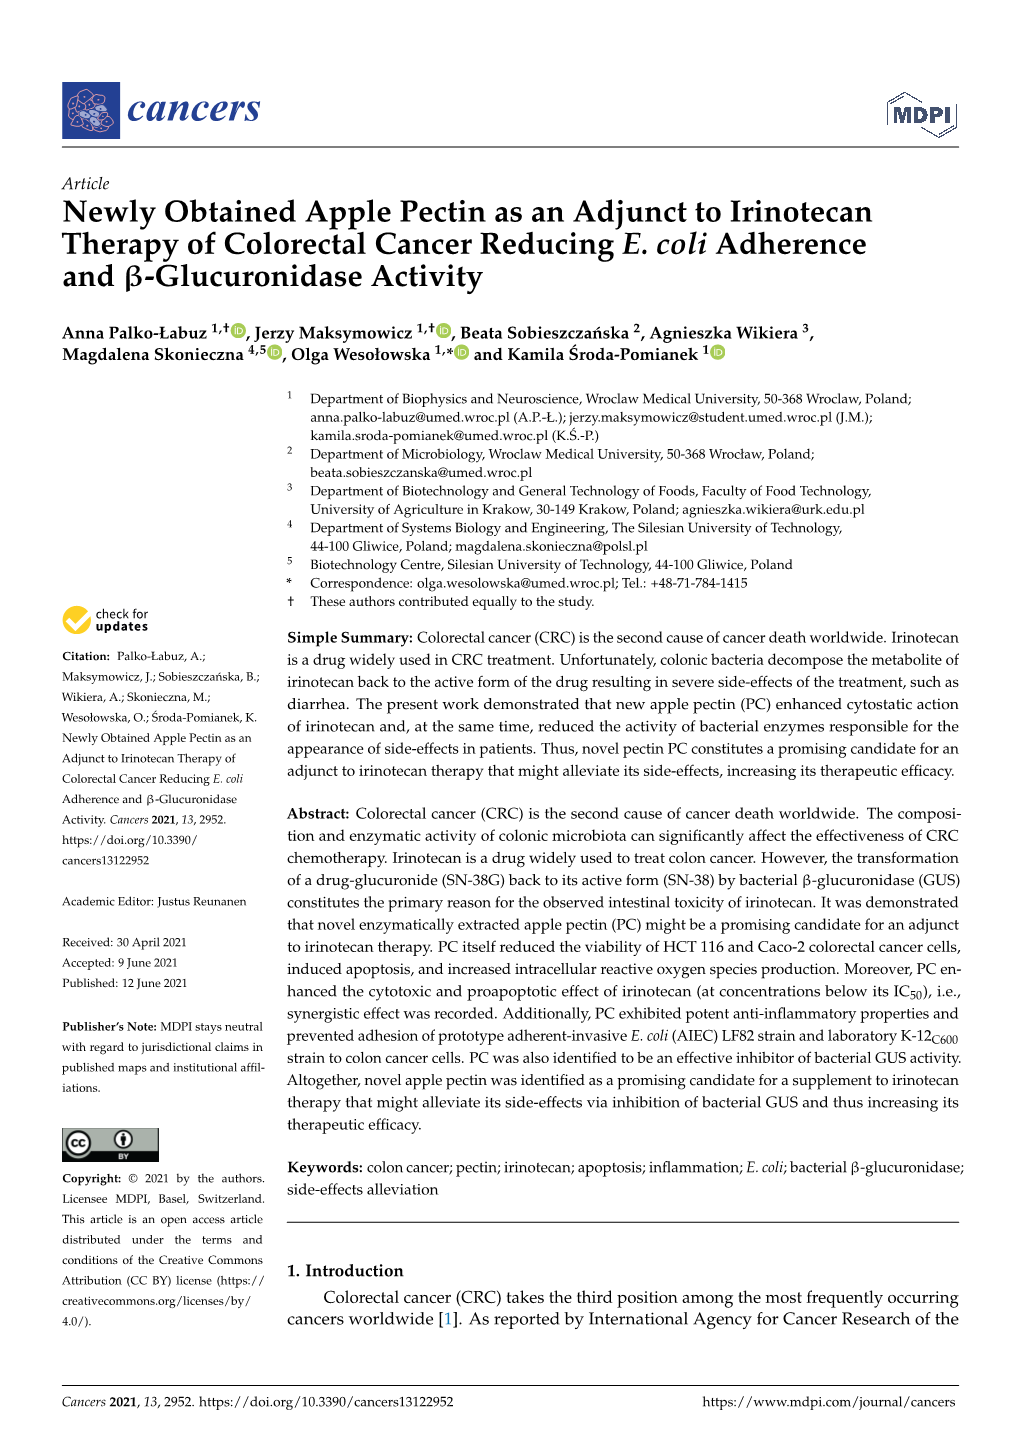 Newly Obtained Apple Pectin As an Adjunct to Irinotecan Therapy of Colorectal Cancer Reducing E